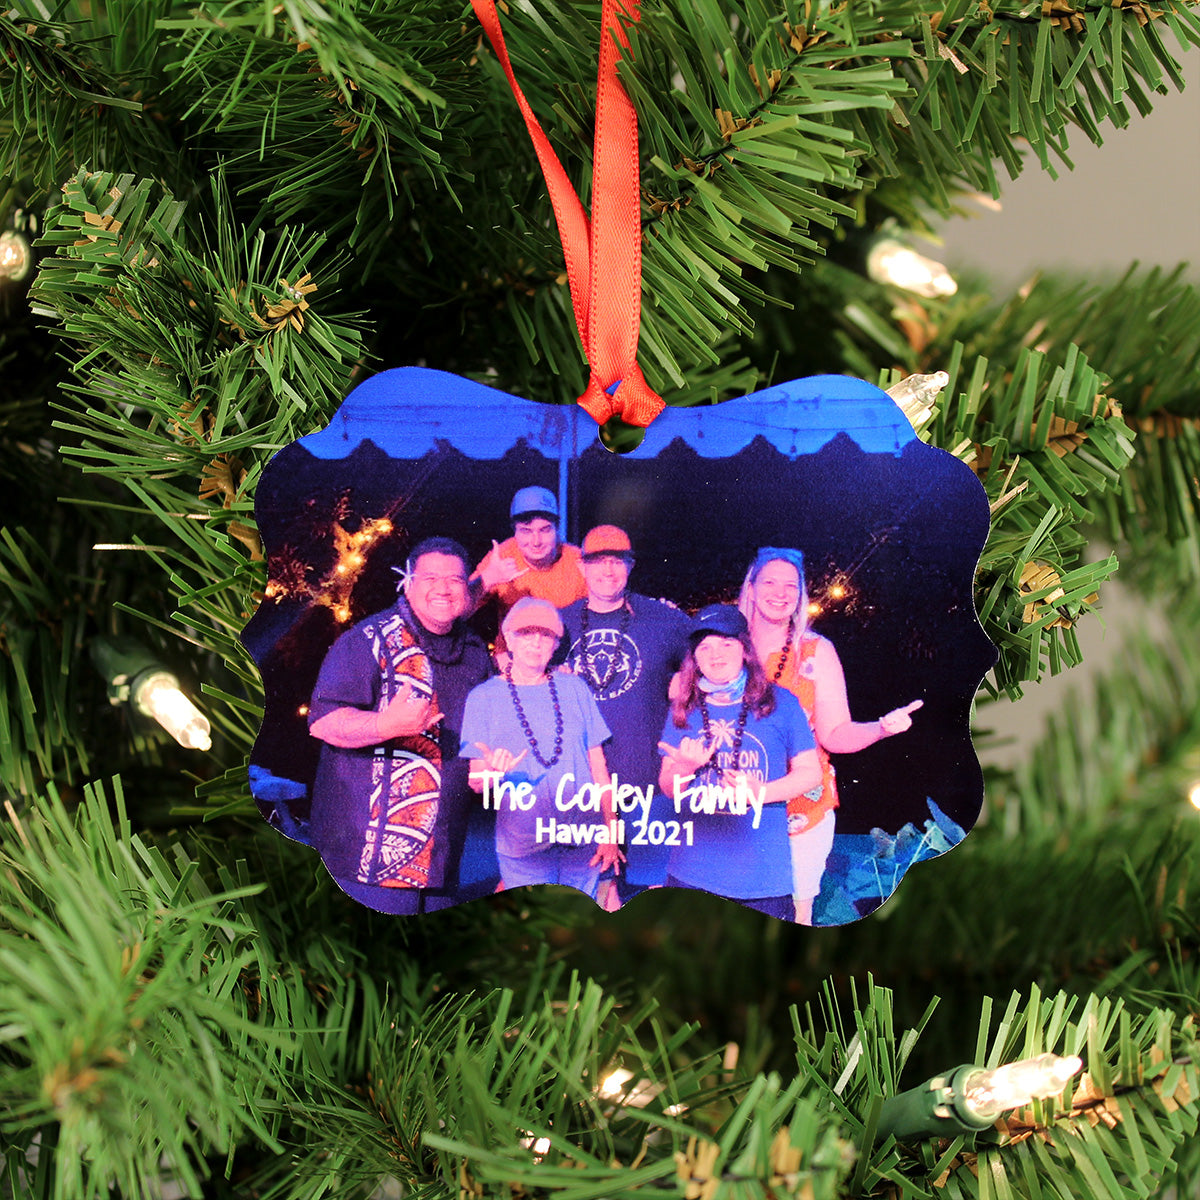 Personalized Photo Ornament on Metal (Benelux 4"x3", 2-Sided)